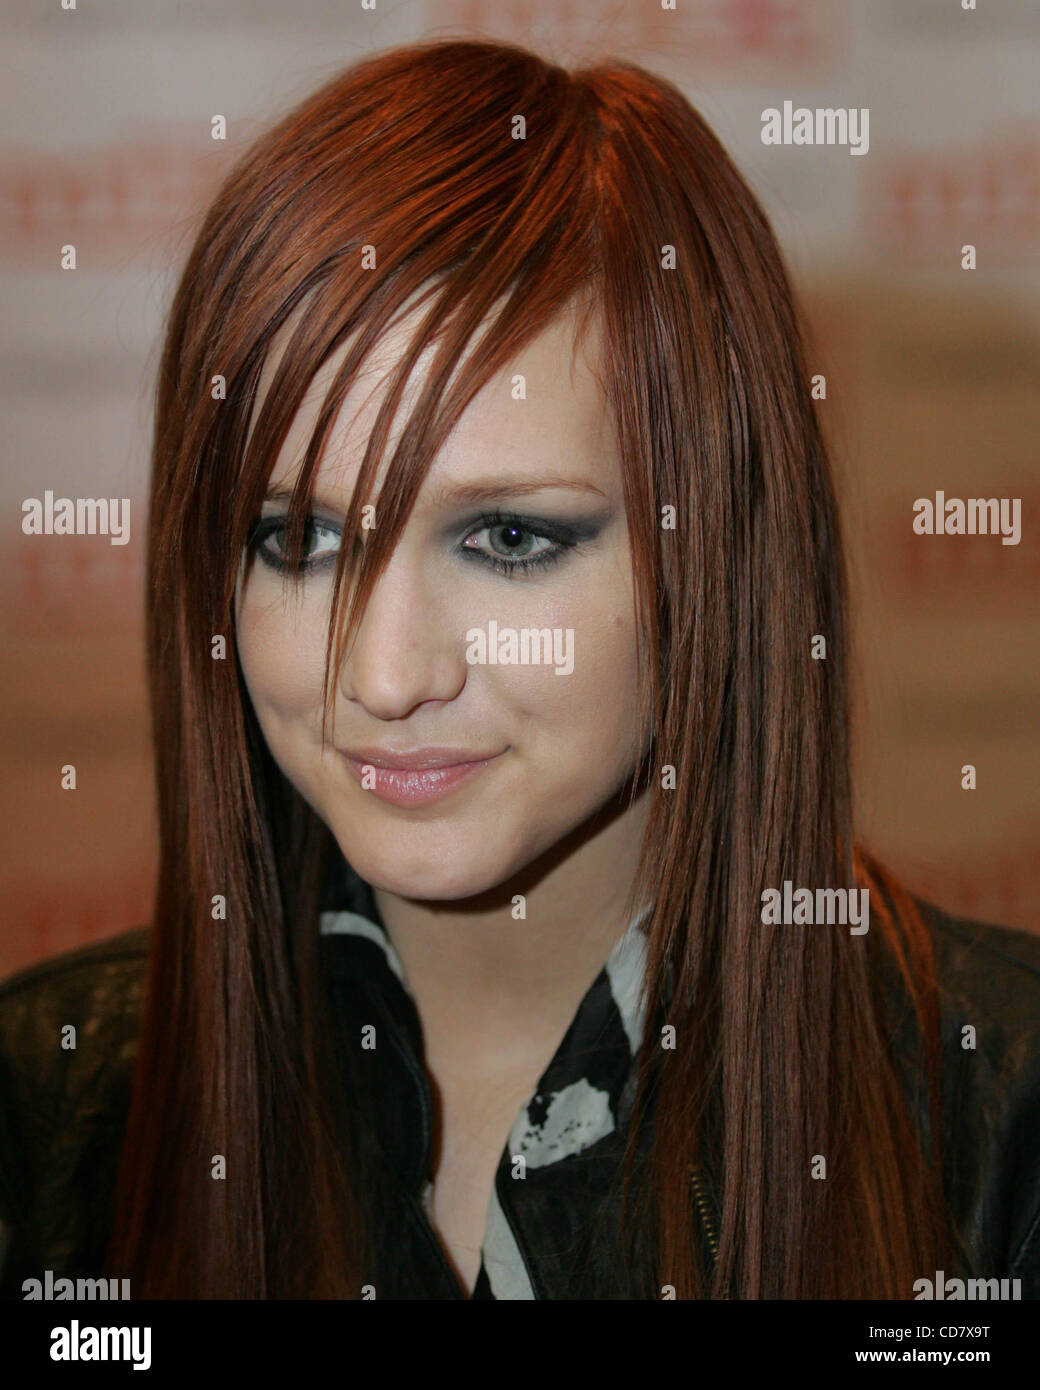 Mar 01, 2008 - Atlantic City, New Jersey, USA - ASHLEE SIMPSON at Club Mixx in the Borgata Casino Spa. Ashlee Simpson performed a few songs as Pete Wentz  was the guest DJ of the night. The couple confirmed last week that the Fall Out Boy has given Simpson a promise ring. (Credit Image: © Tom Brigli Stock Photo